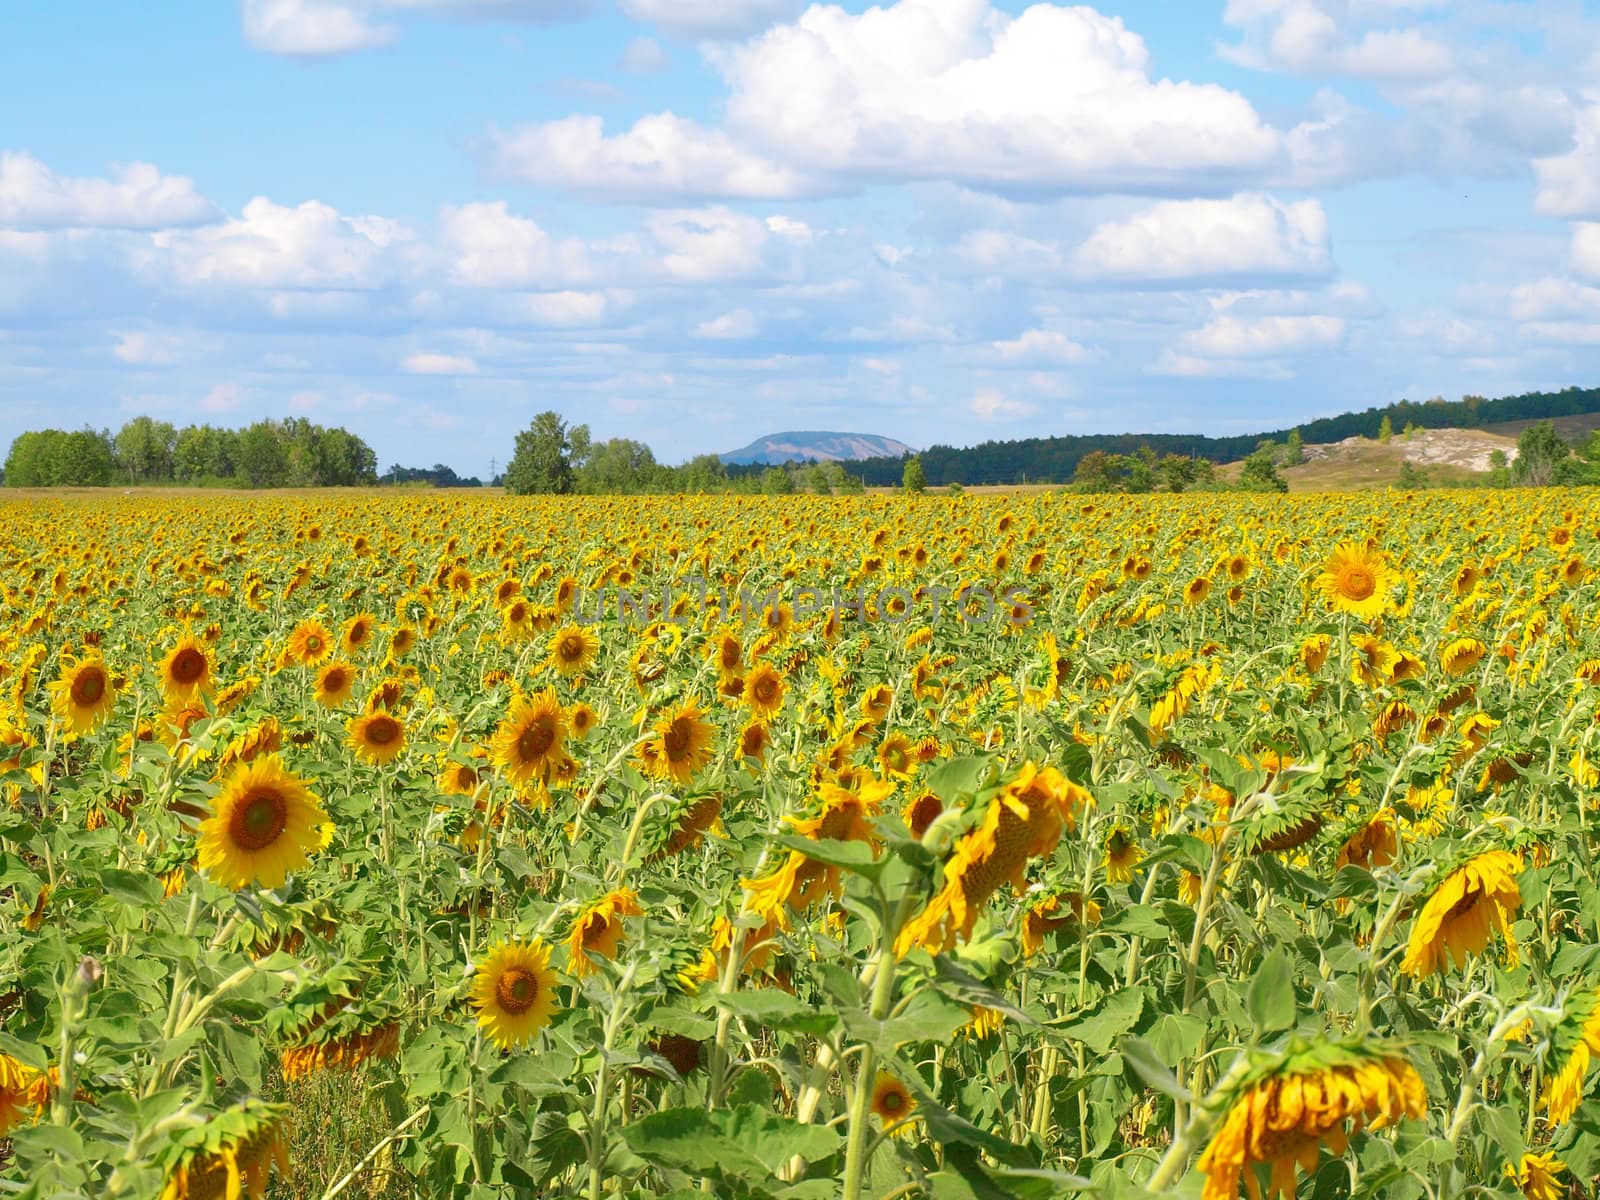 Sunflower's field with blue sky